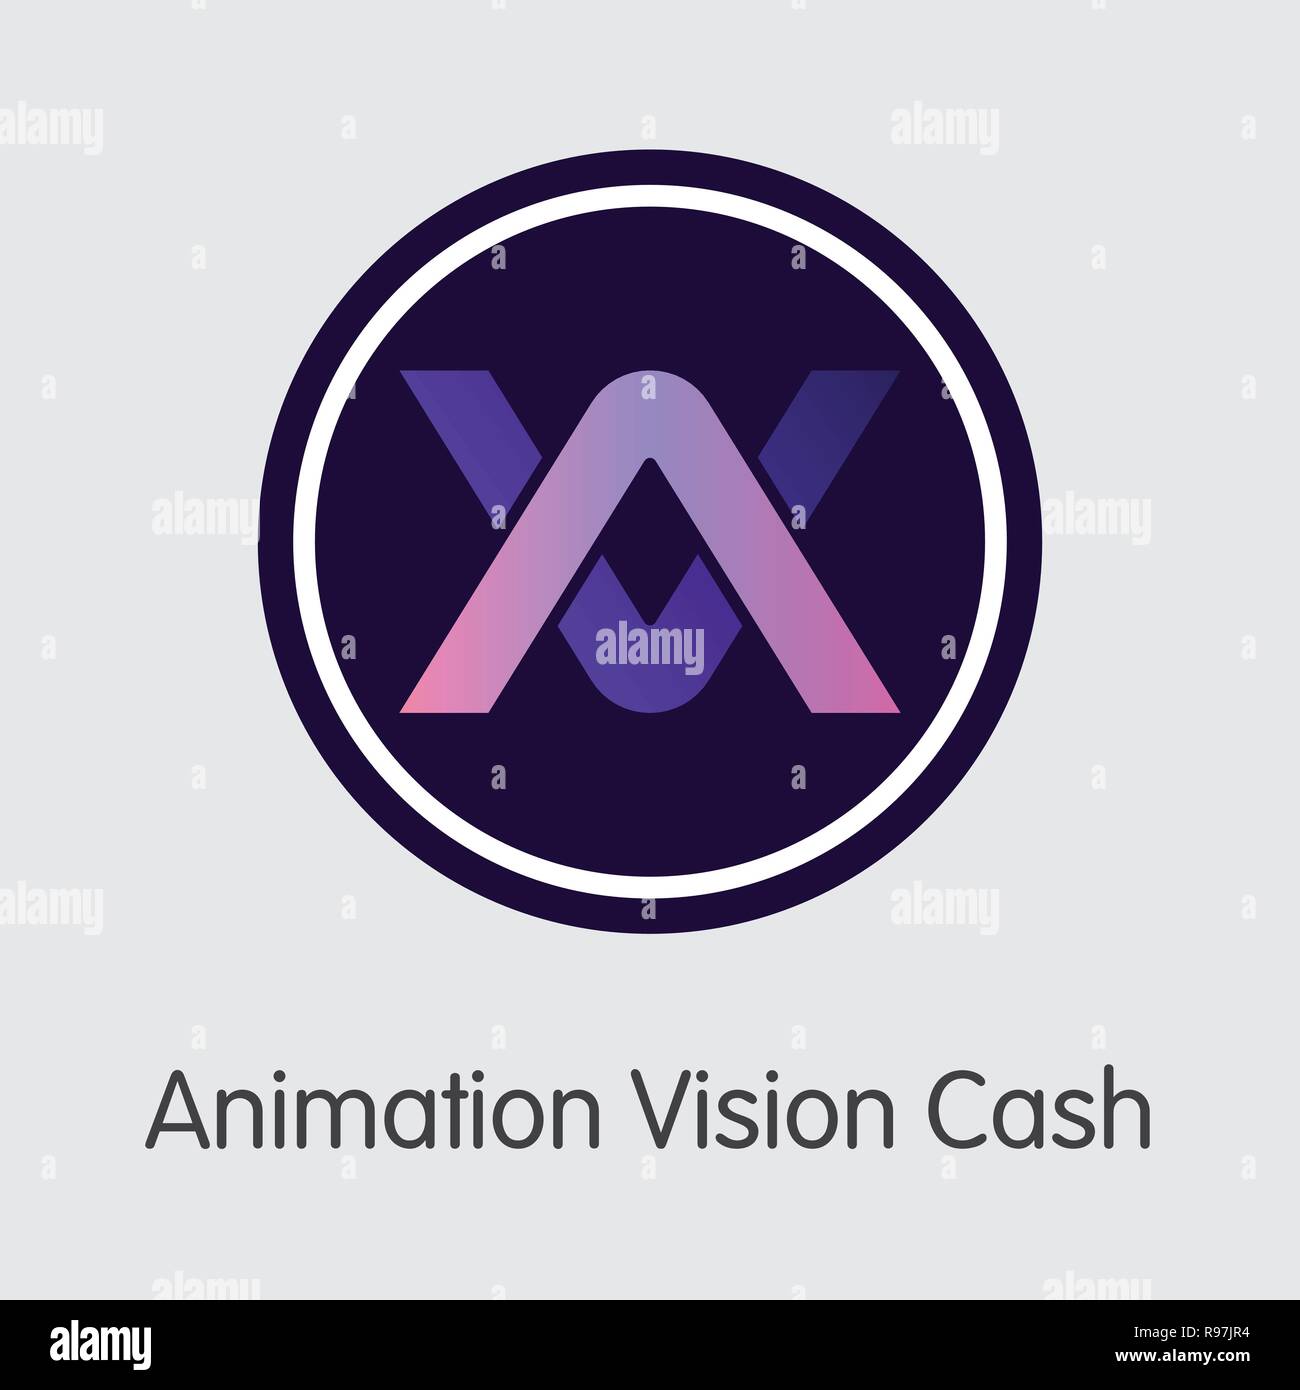 AVH - Animation Vision Cash. The Crypto Coins or Cryptocurrency  Stock Vector